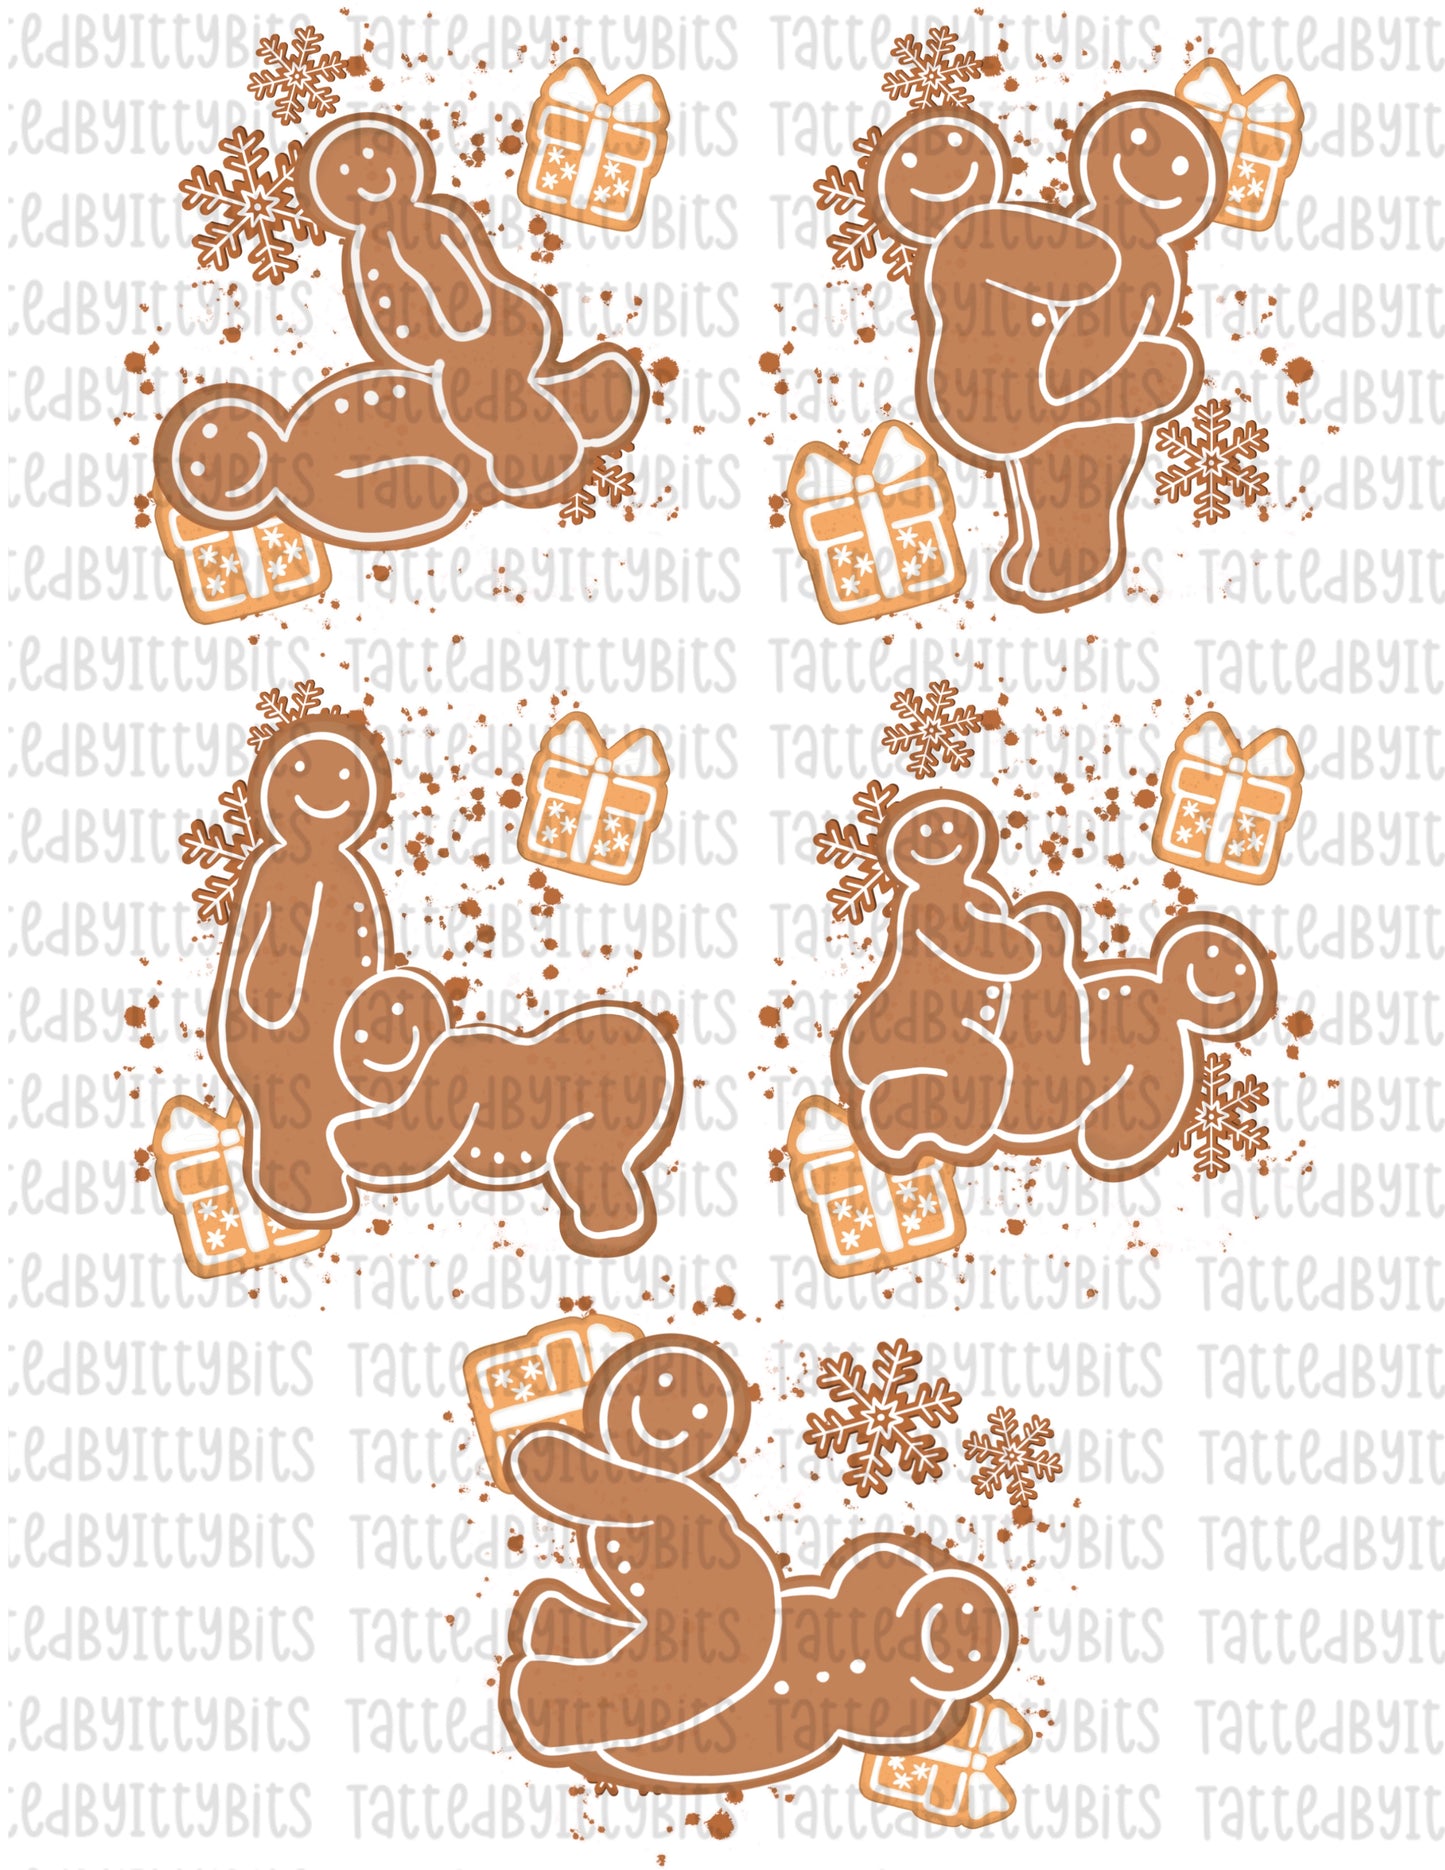 5 pc Naughty Adult GingerBreads Temporary Tattoos Pack